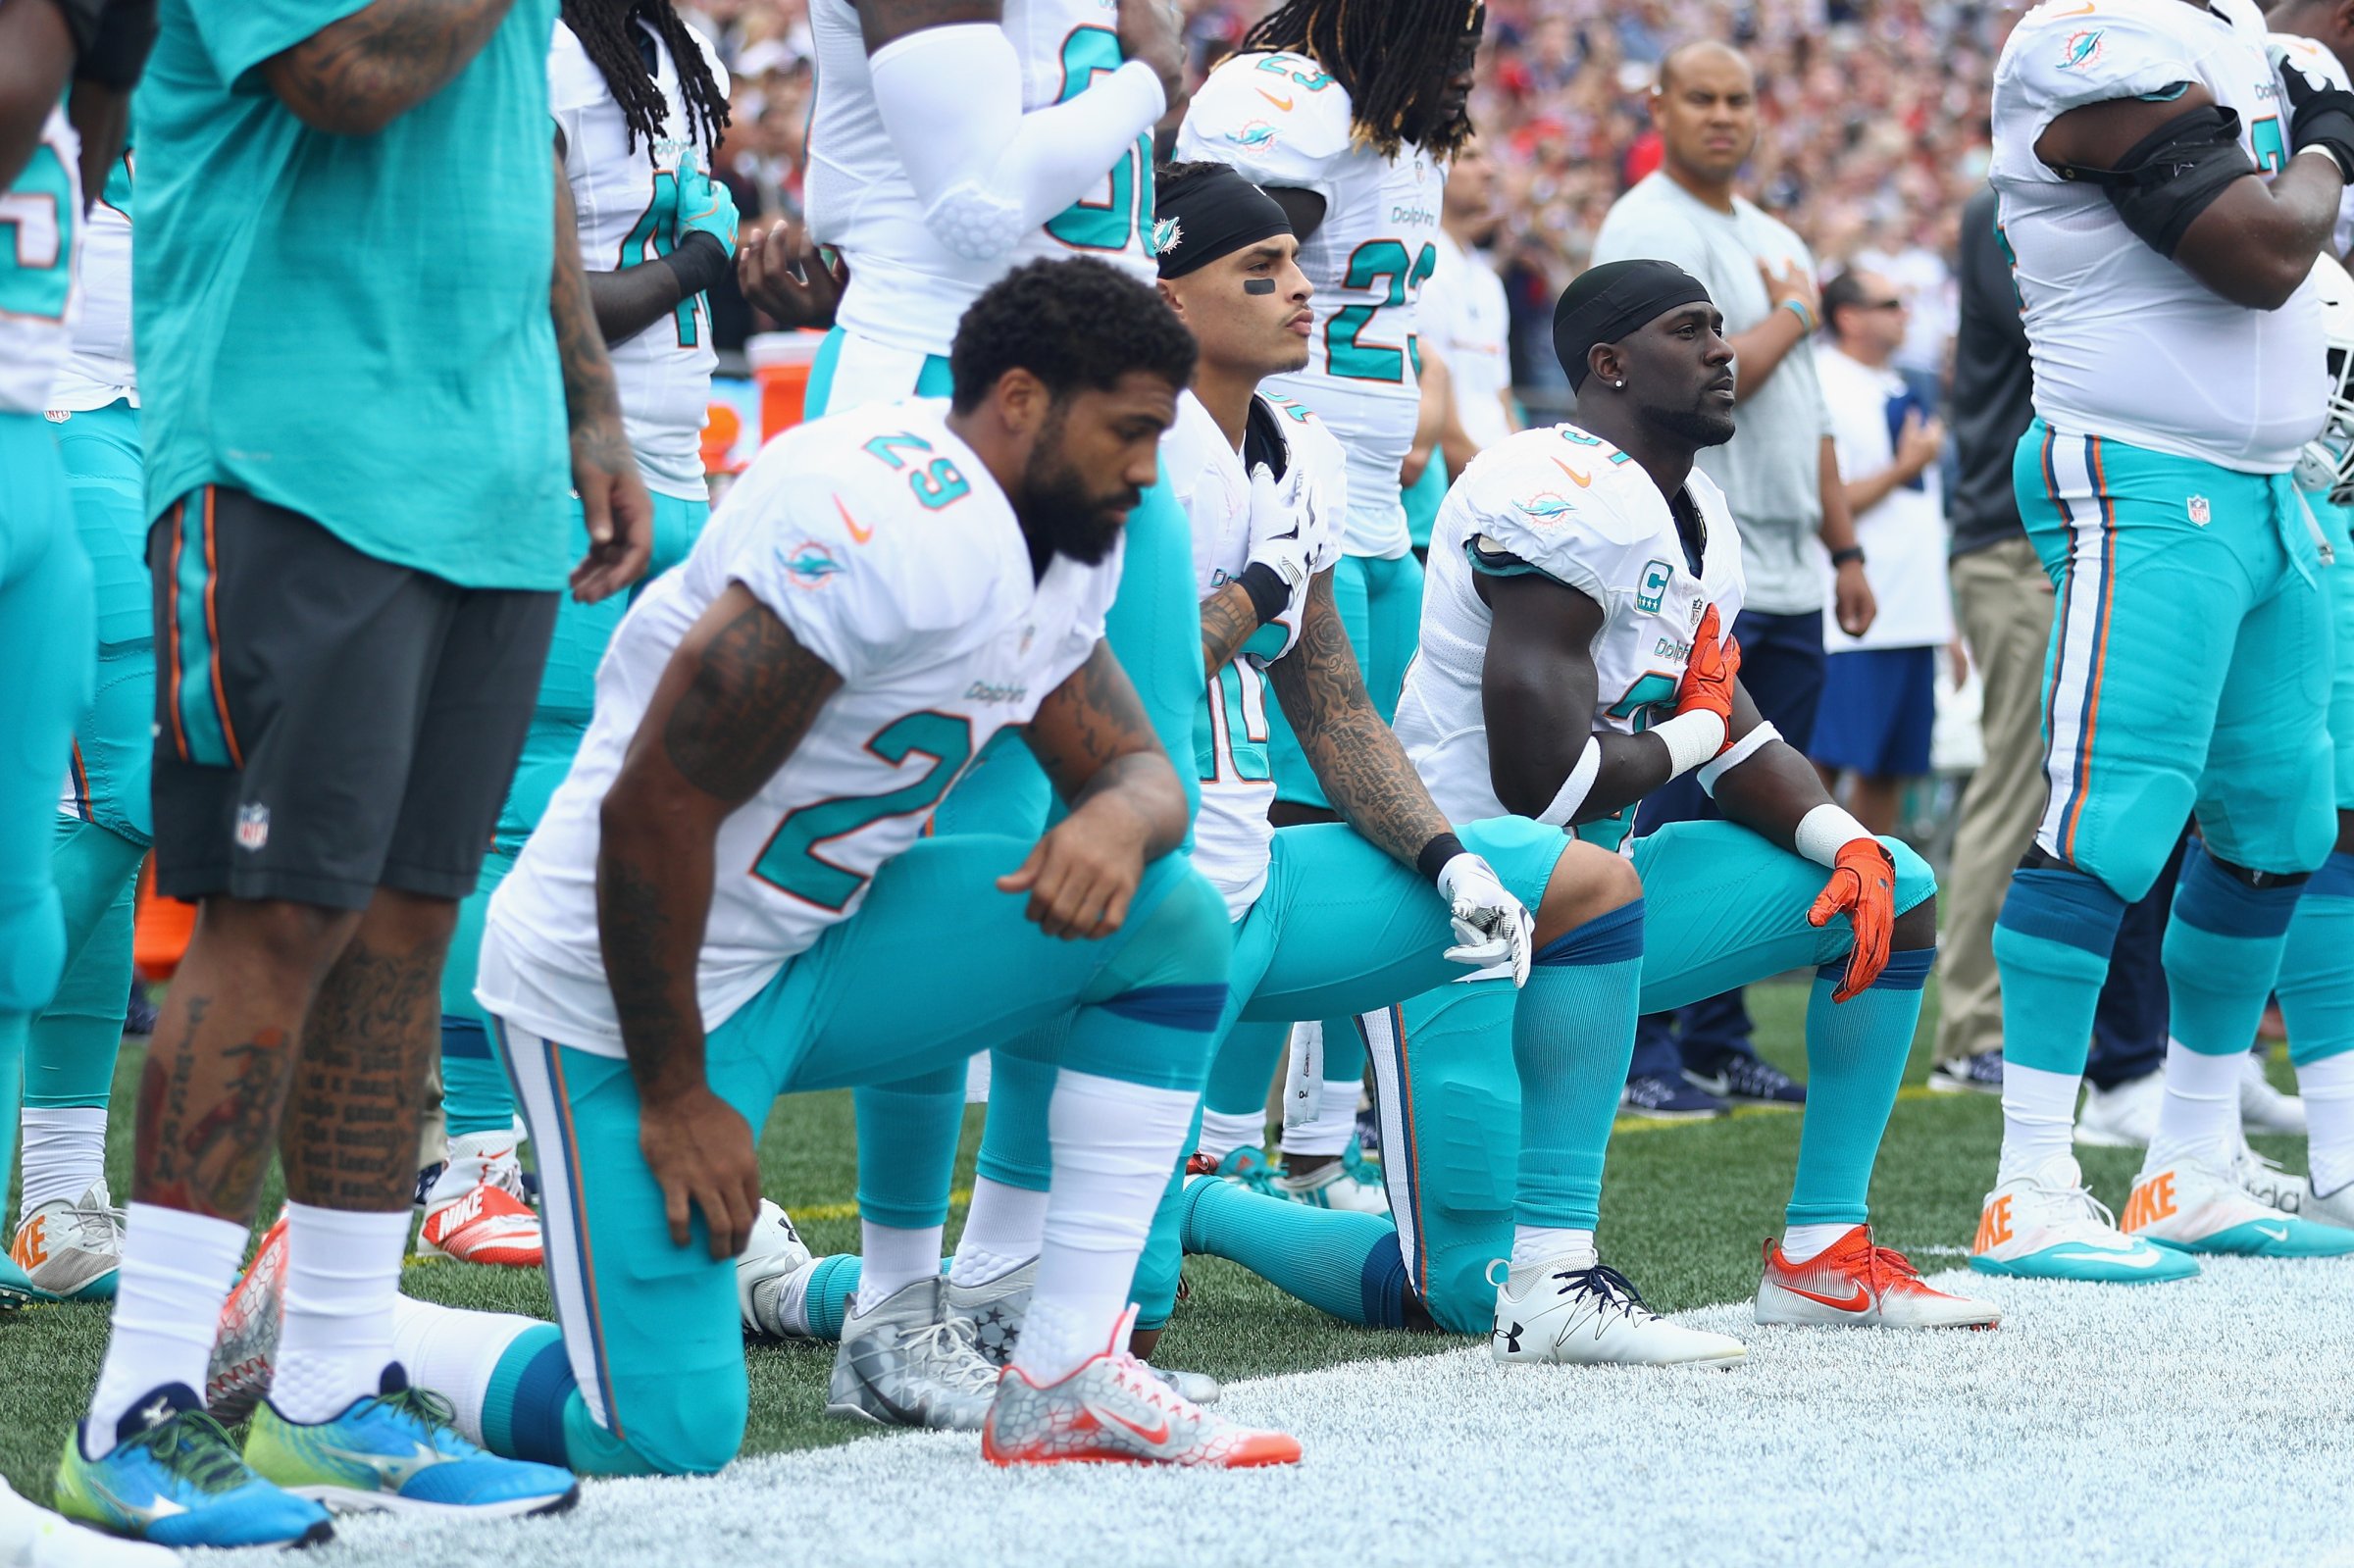 (L-R) Arian Foster #29, Kenny Stills #10 and Michael Thomas #31 of the Miami Dolphins kneel during the national anthem before the game against the New England Patriots at Gillette Stadium in Foxboro, Mass., on Sept. 18, 2016.